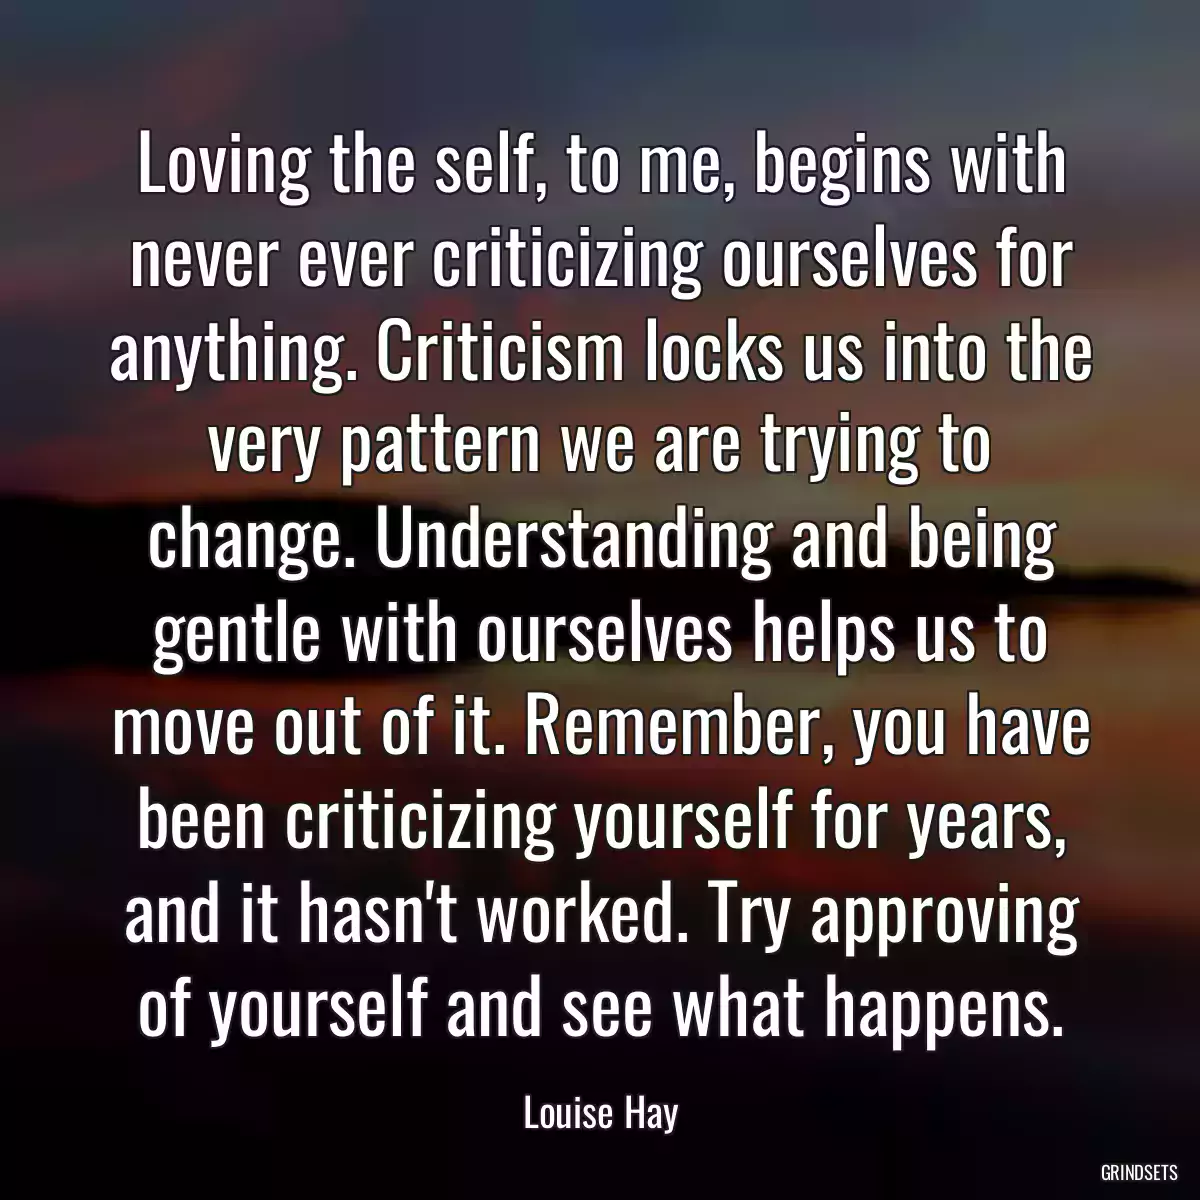 Loving the self, to me, begins with never ever criticizing ourselves for anything. Criticism locks us into the very pattern we are trying to change. Understanding and being gentle with ourselves helps us to move out of it. Remember, you have been criticizing yourself for years, and it hasn\'t worked. Try approving of yourself and see what happens.